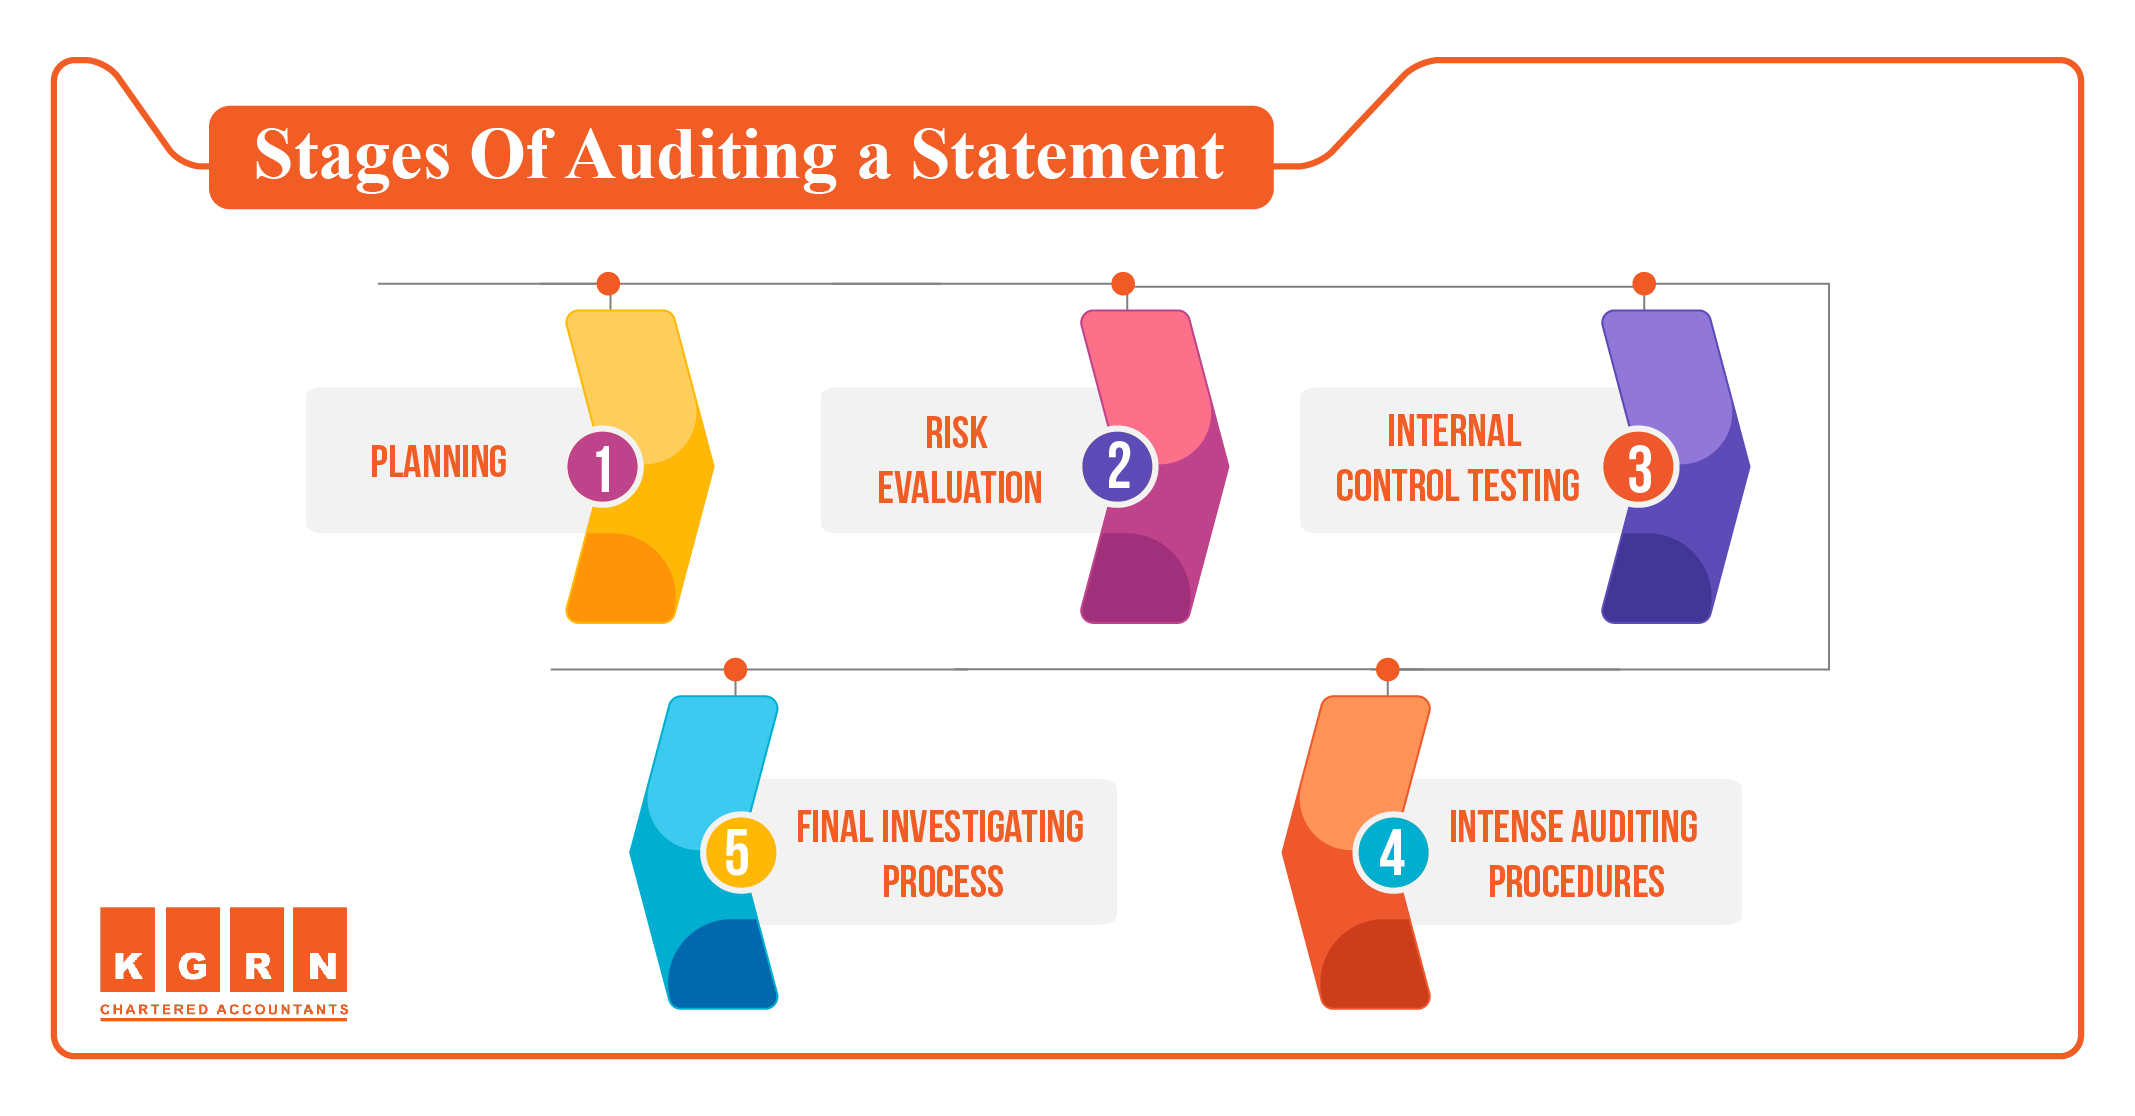 Stages of Auditing a Statement